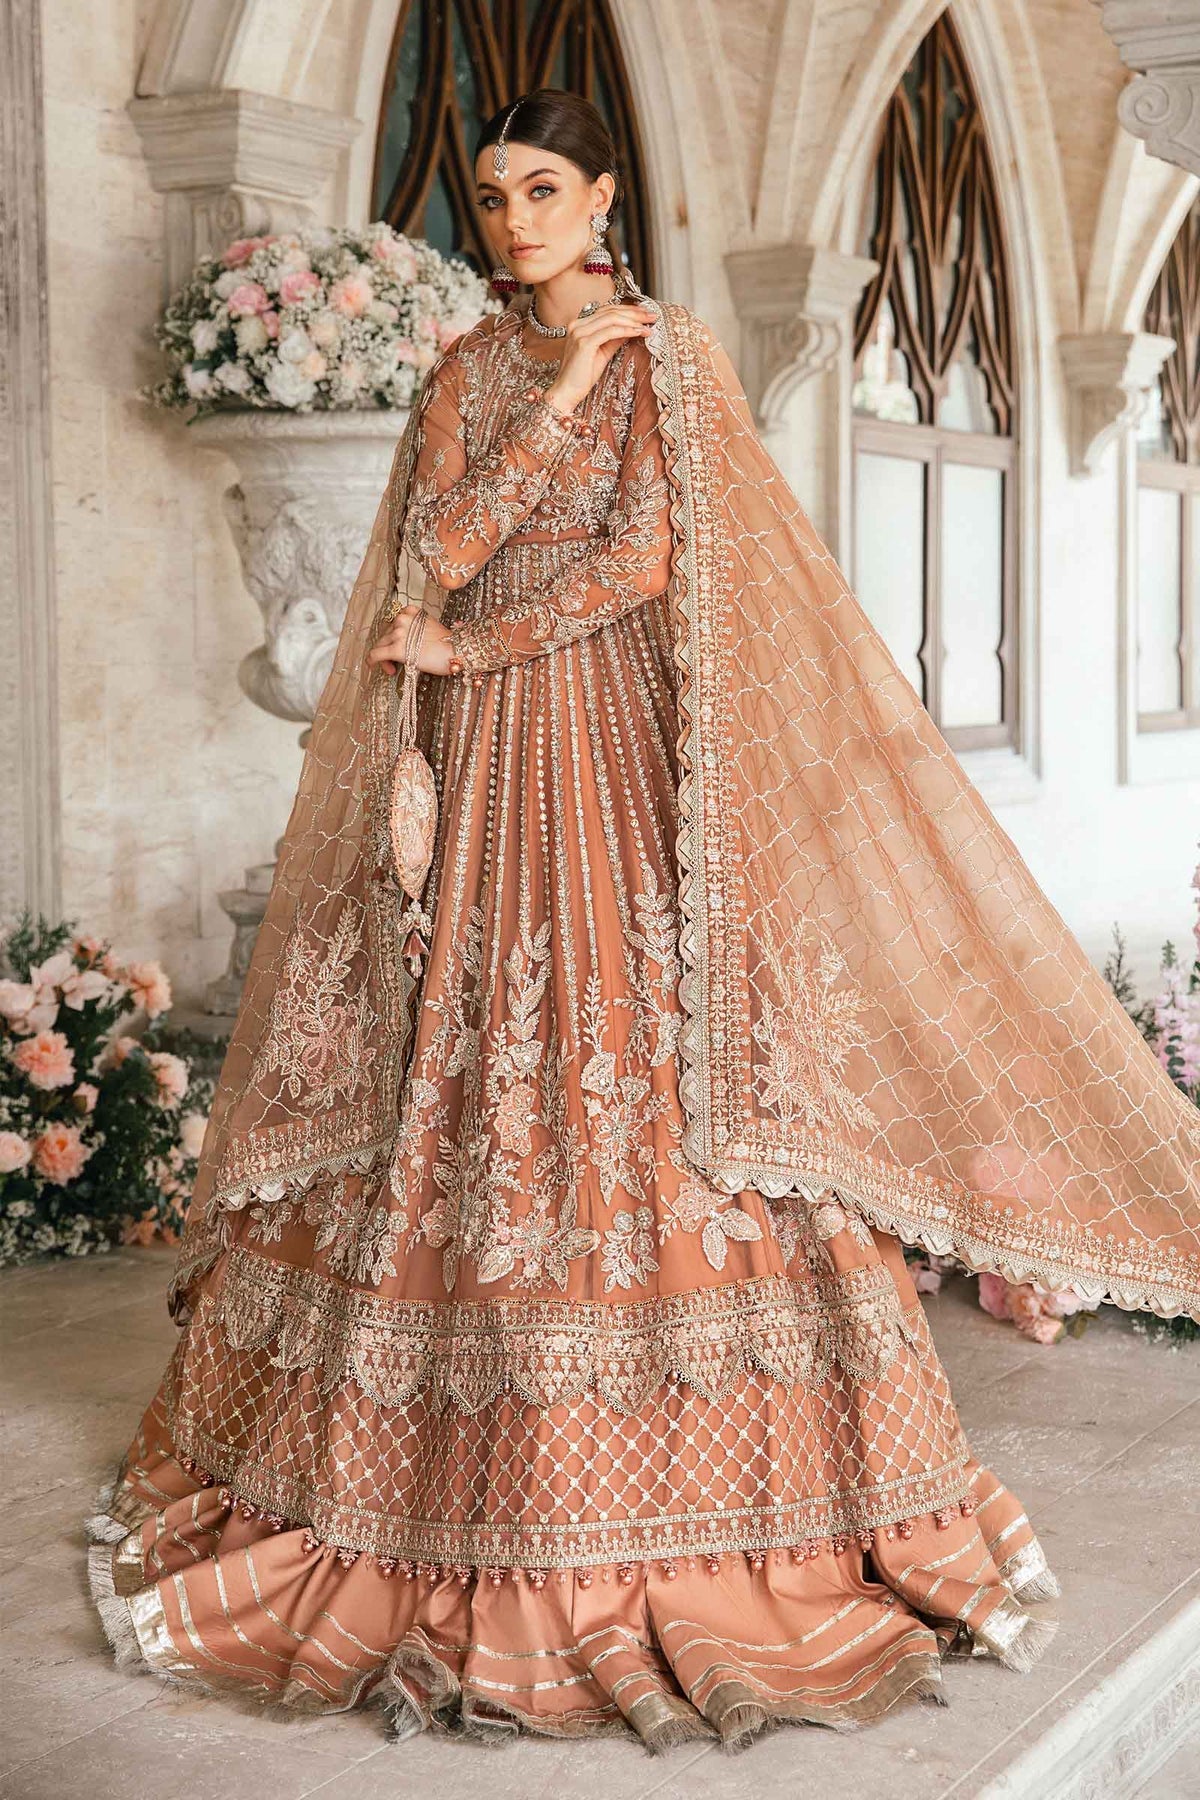 Maria B Mbroidered Eid Edit Collection 24 (04)